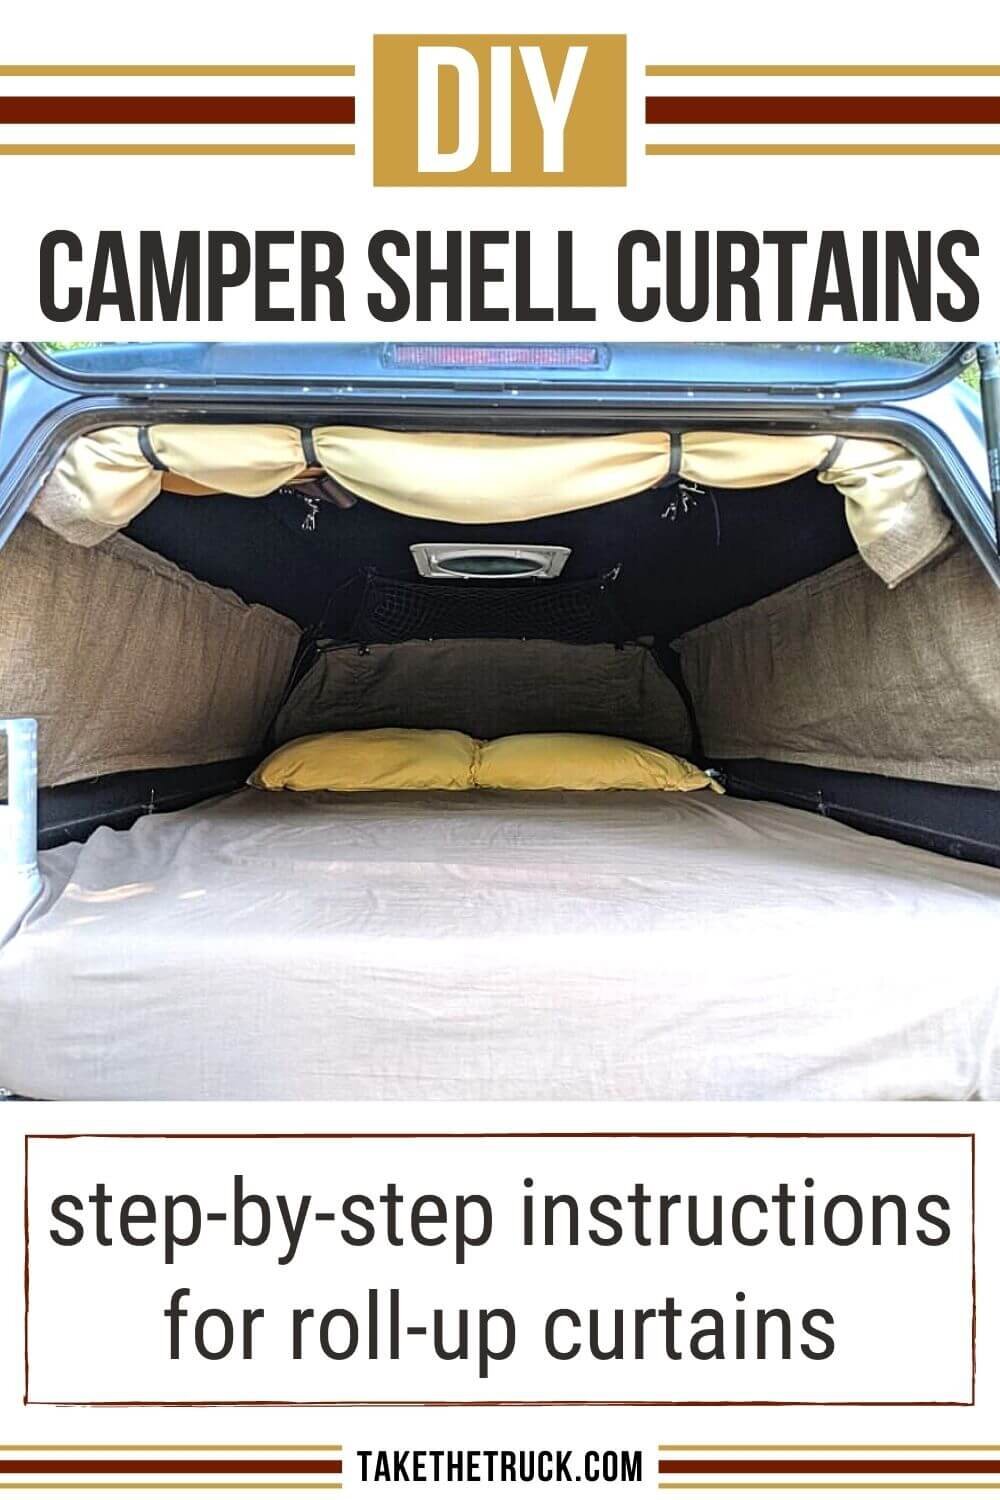 Instructions for making DIY camper shell curtains.